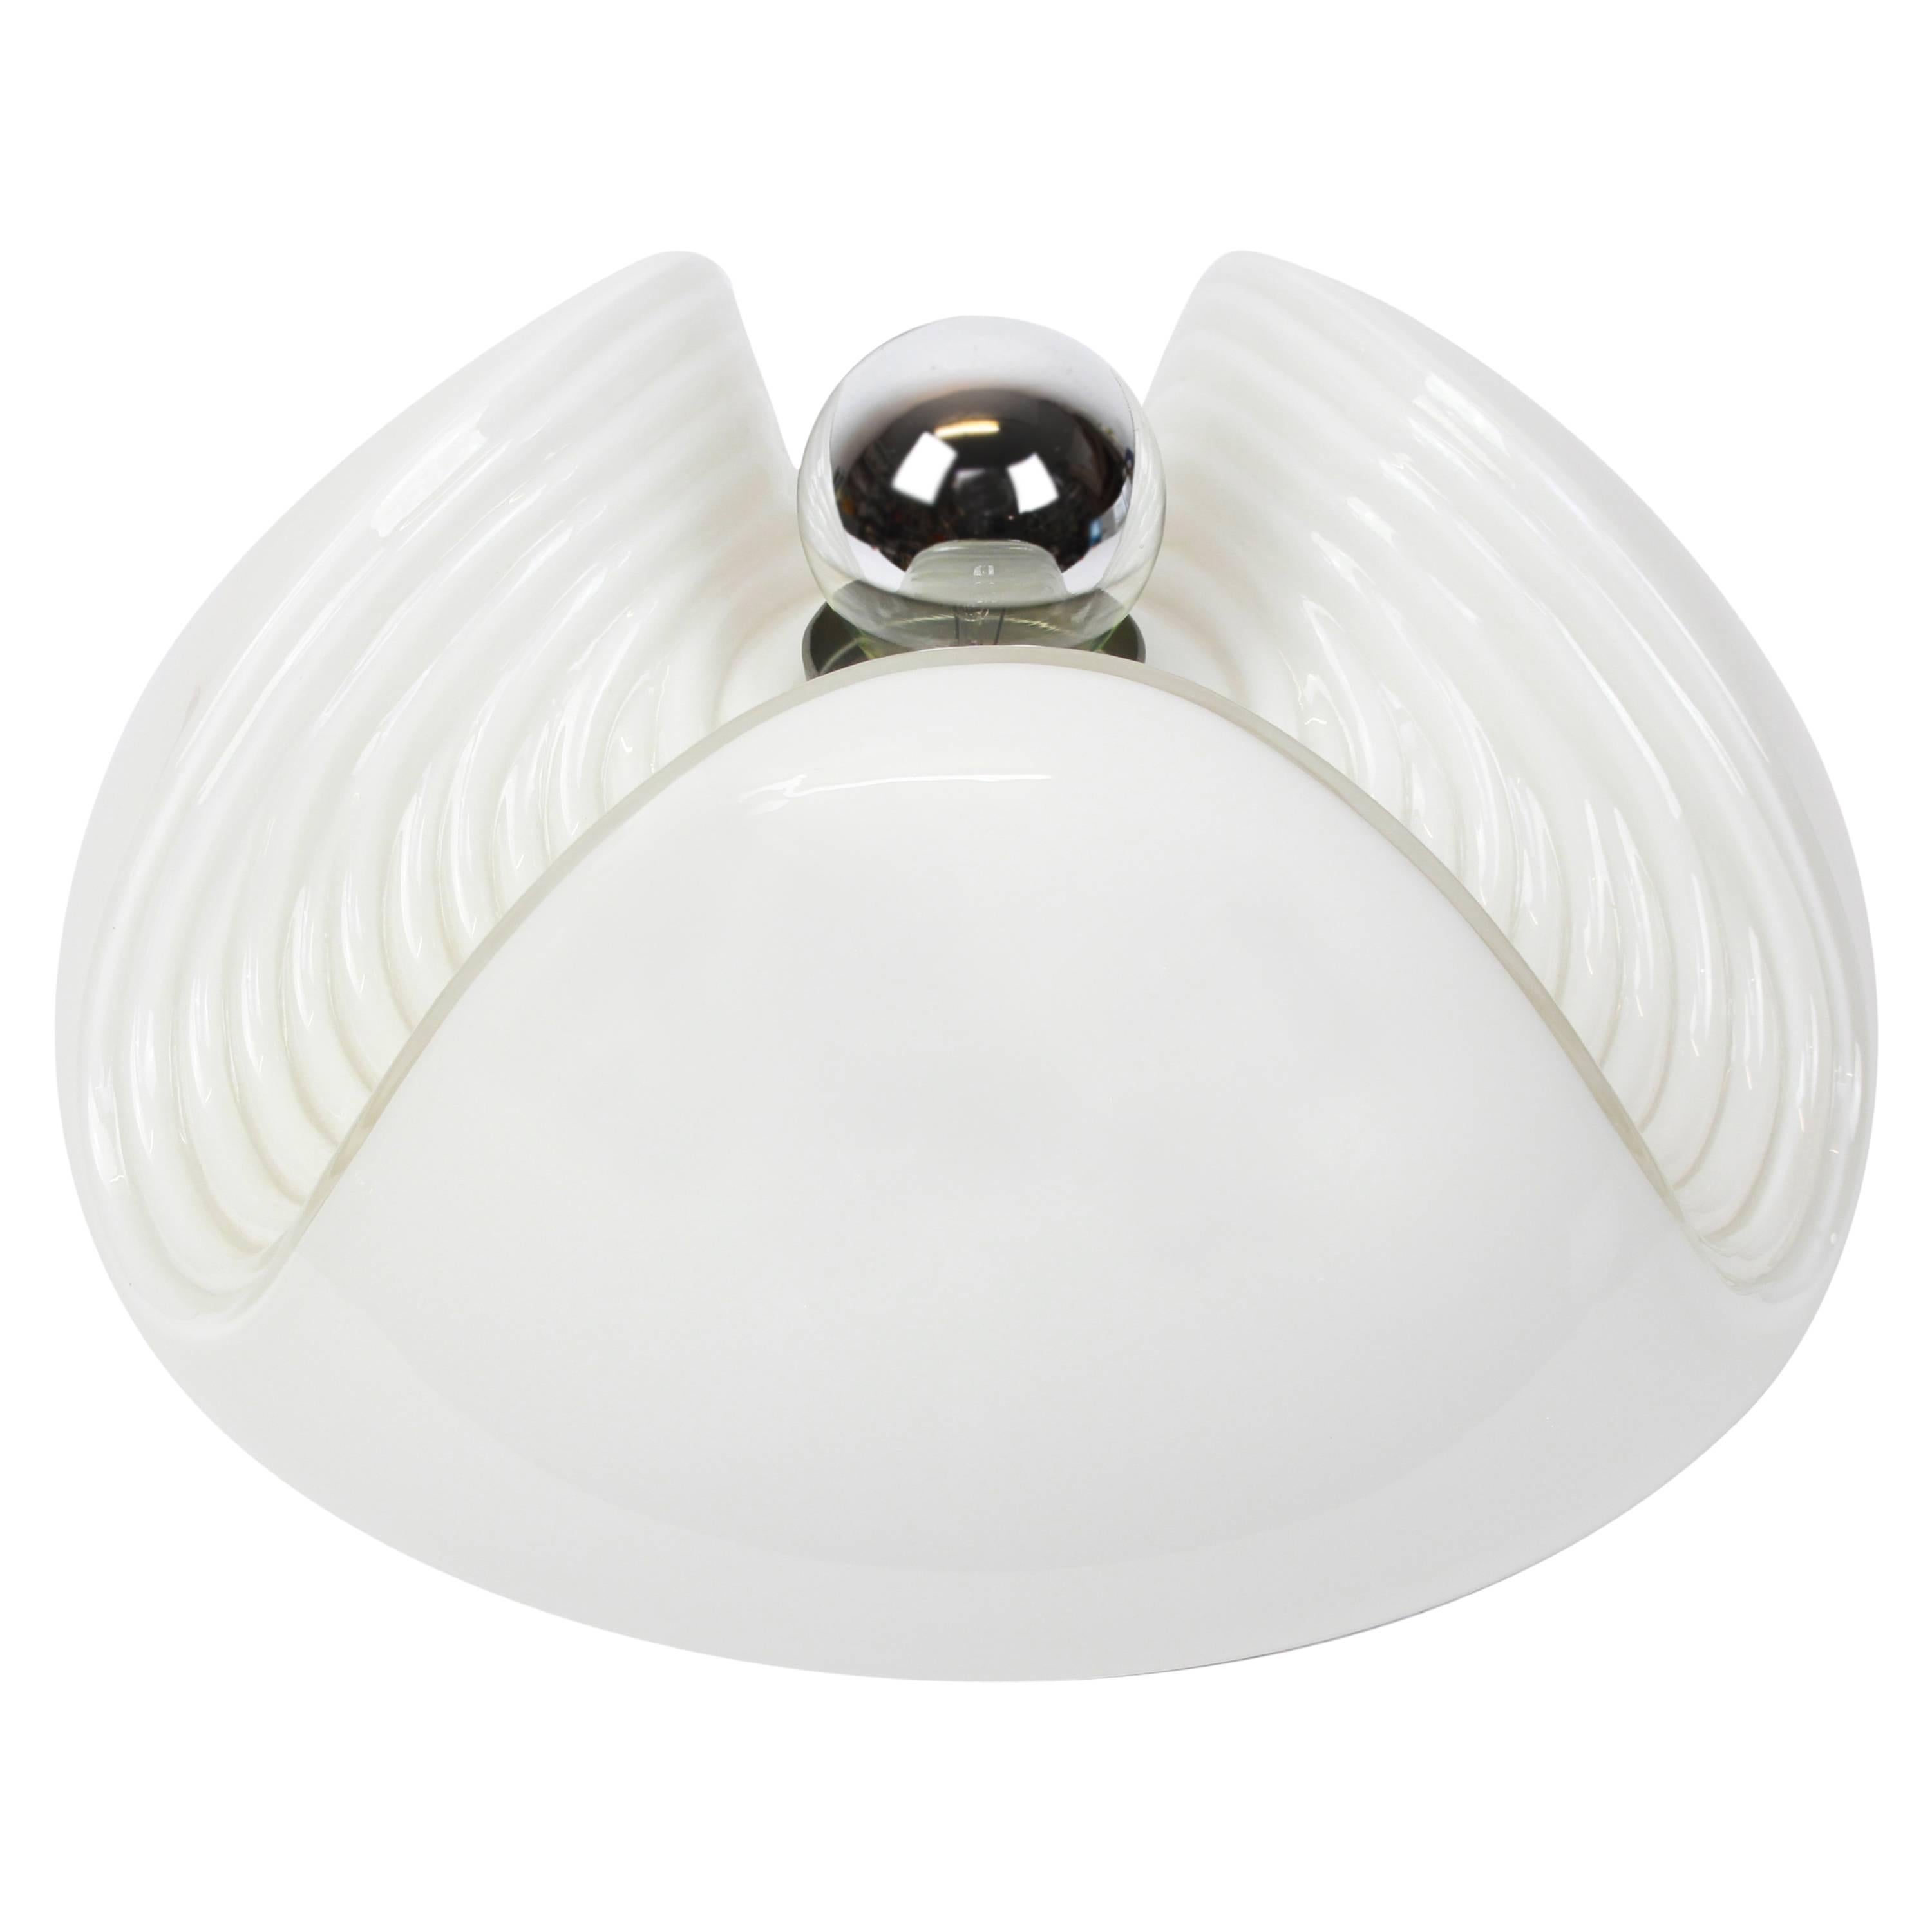 A special round biomorphic white glass wall sconce or flushmount designed by Koch & Lowy for Peill & Putzler, manufactured in Germany, circa the 1970s.

High quality and in very good condition. Cleaned, well-wired and ready to use. 

Each